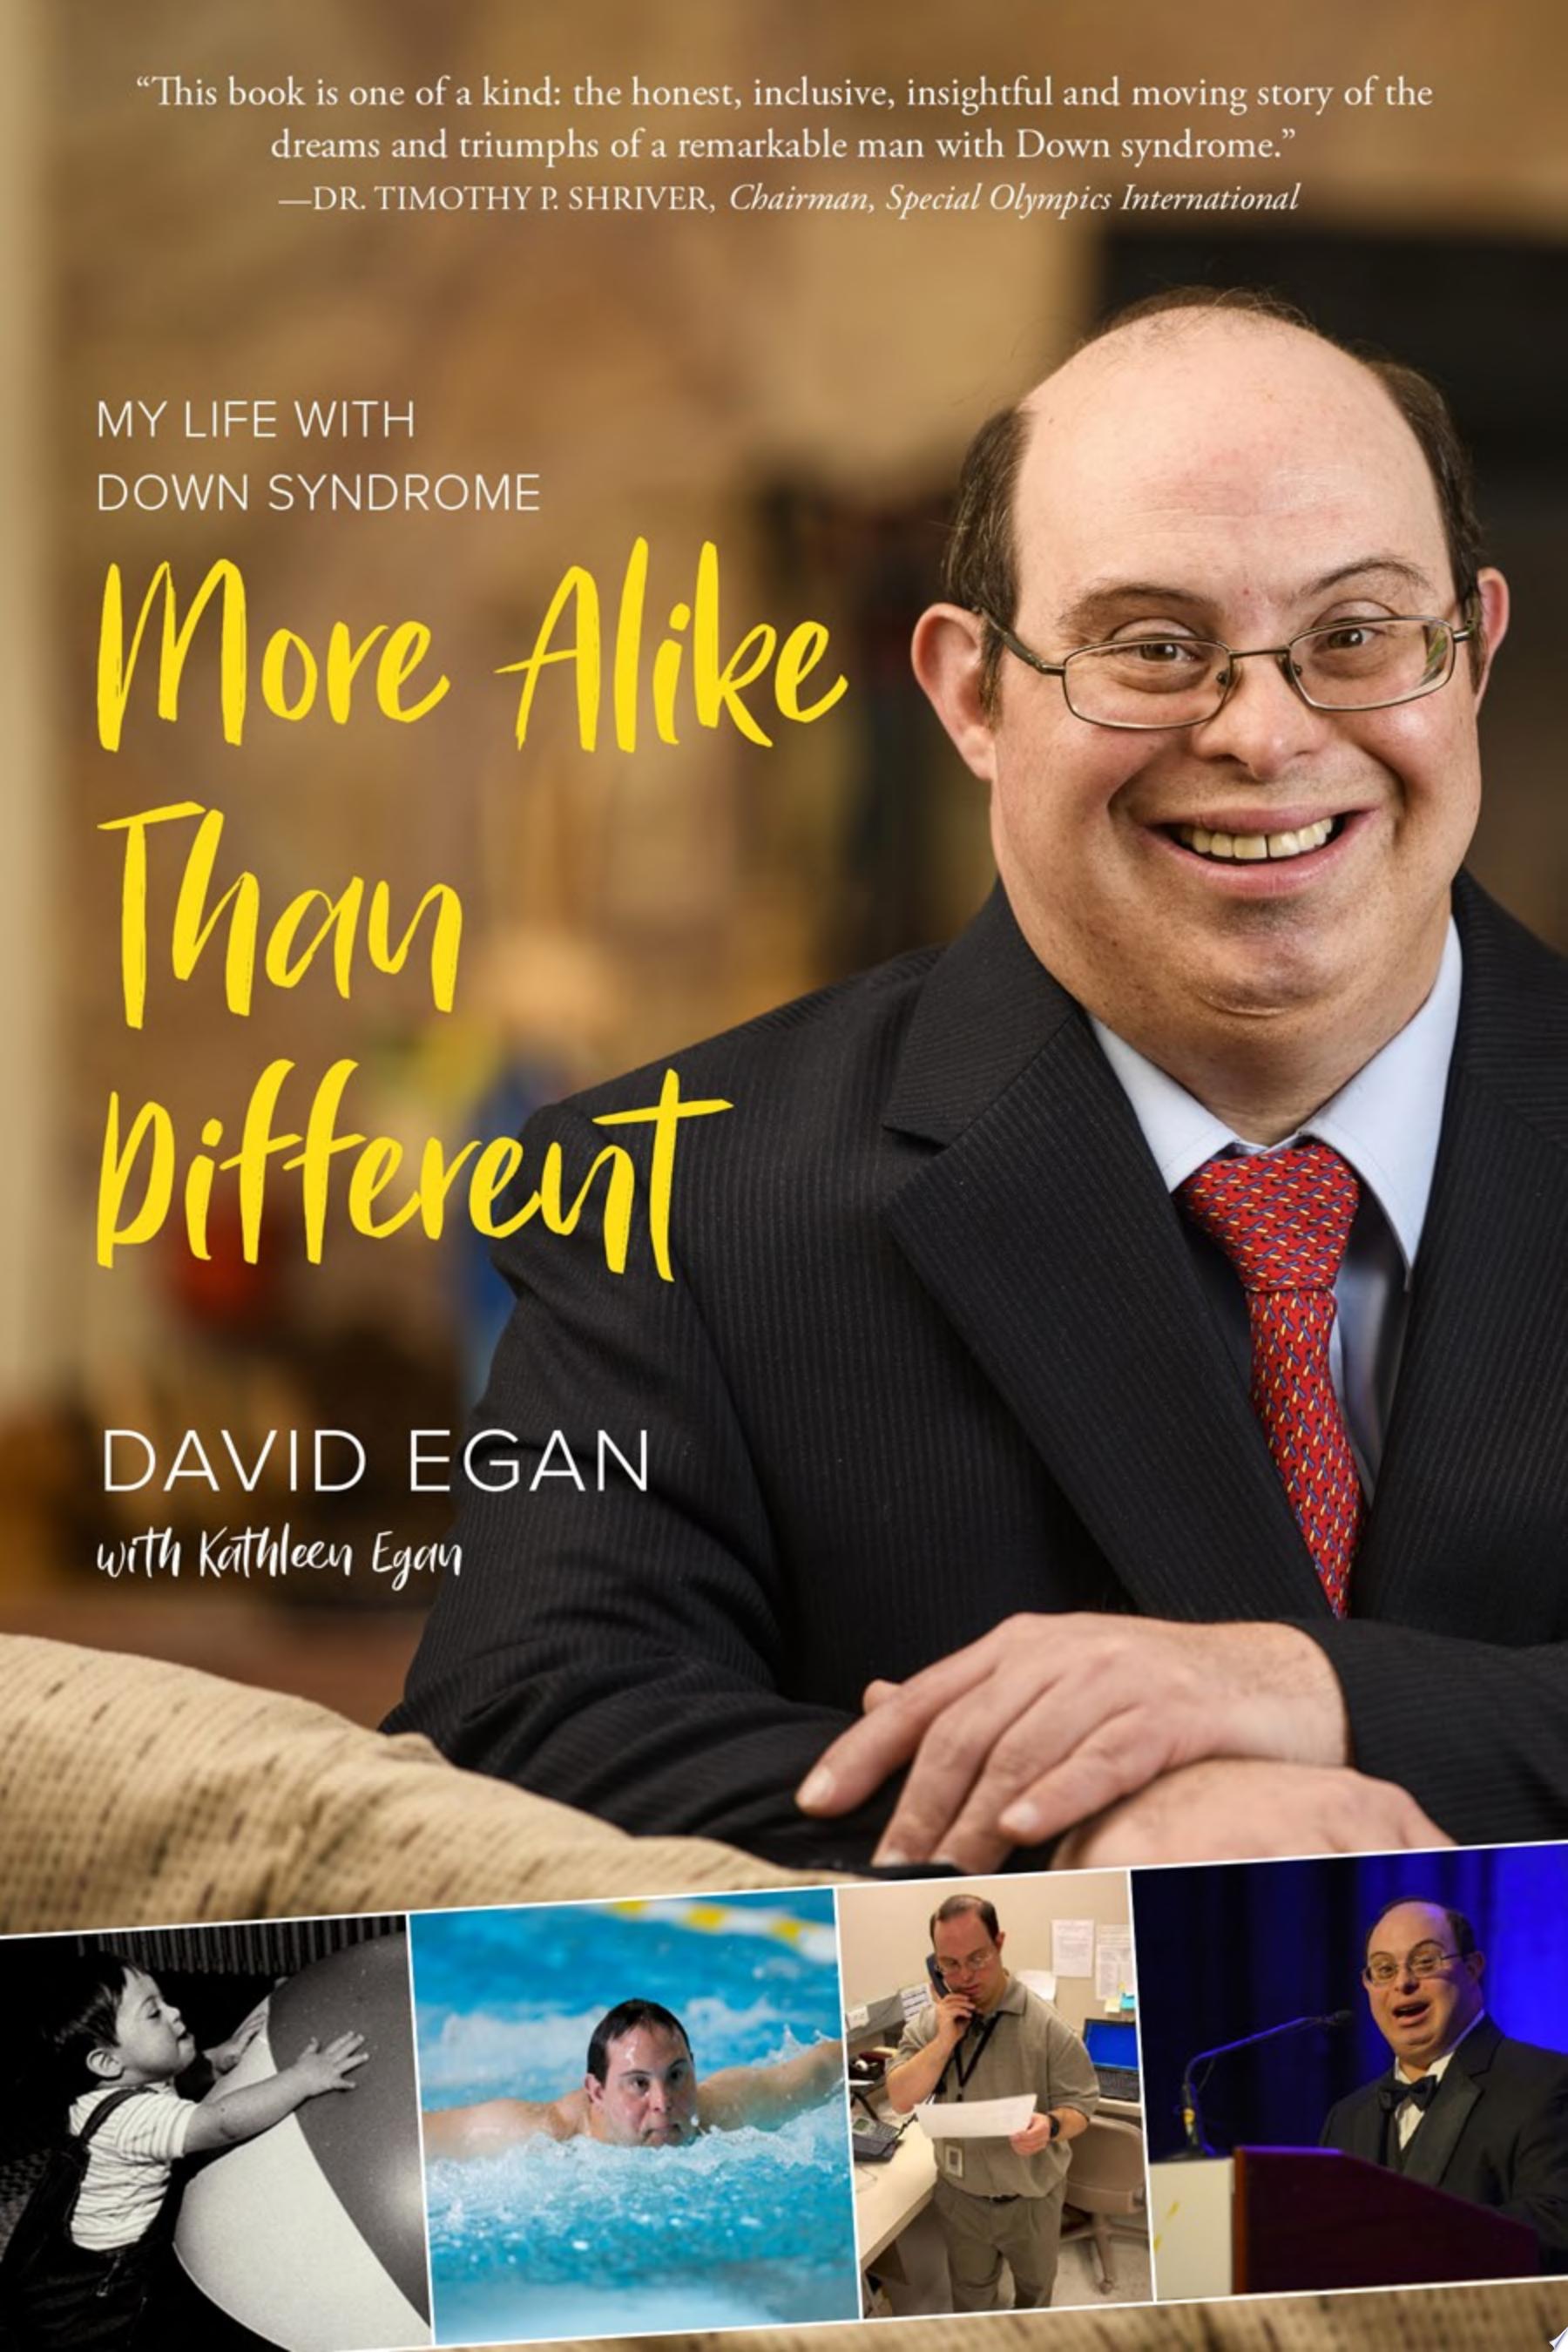 Image for "More Alike Than Different"